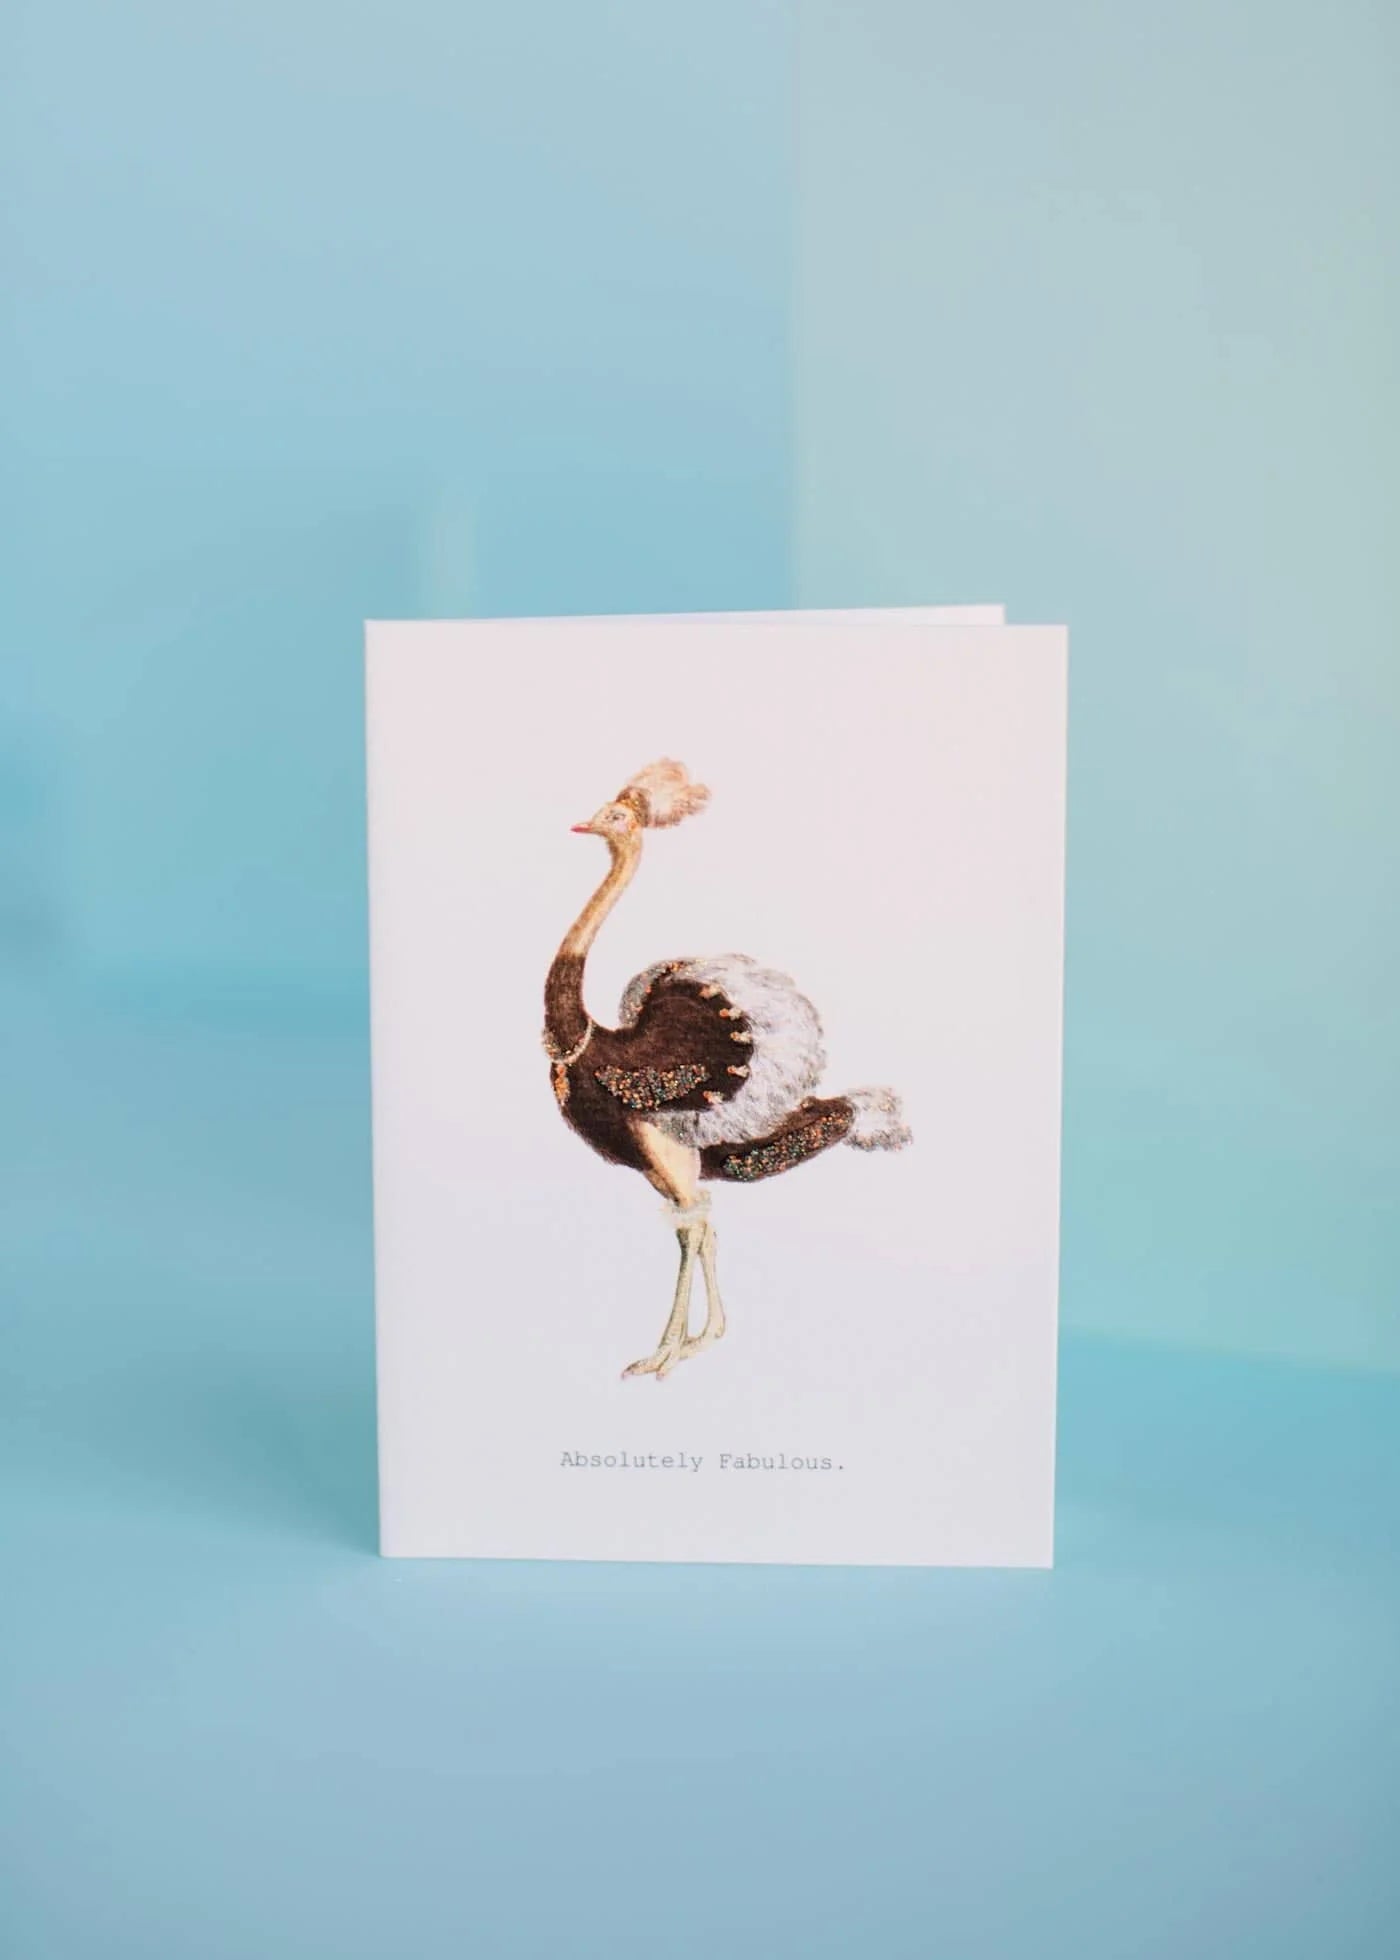 GREETING CARD "ABSOLUTELY FABULOUS"